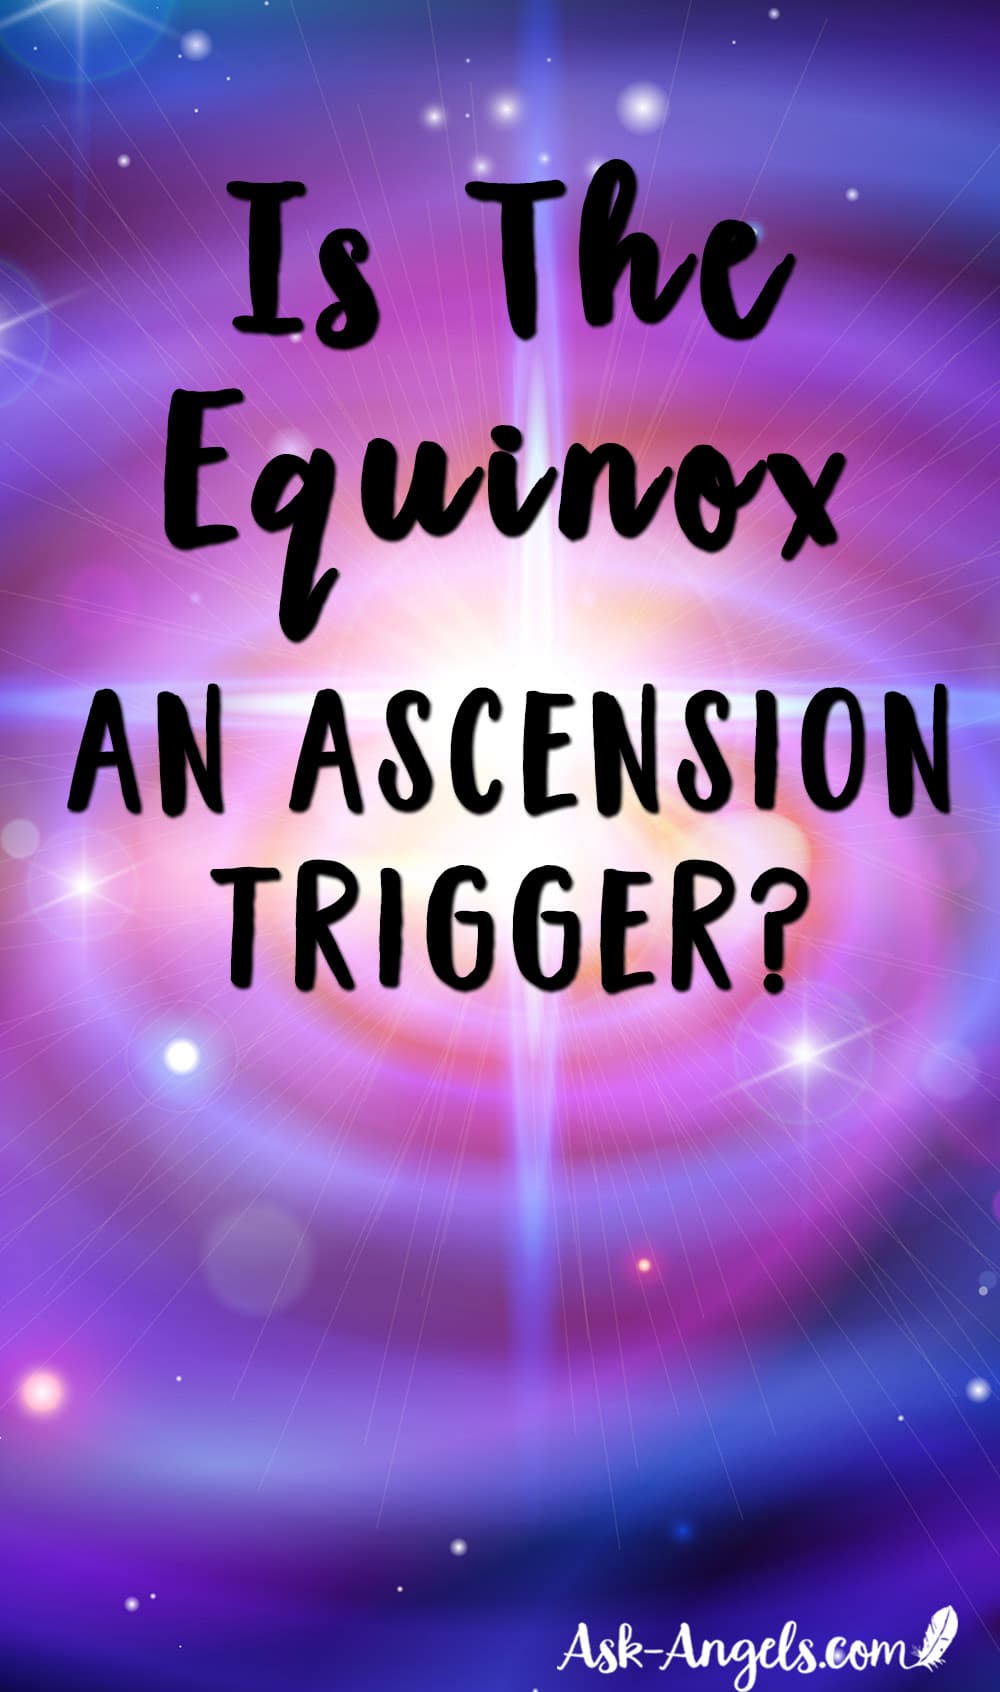 Equinox and an Ascension Trigger